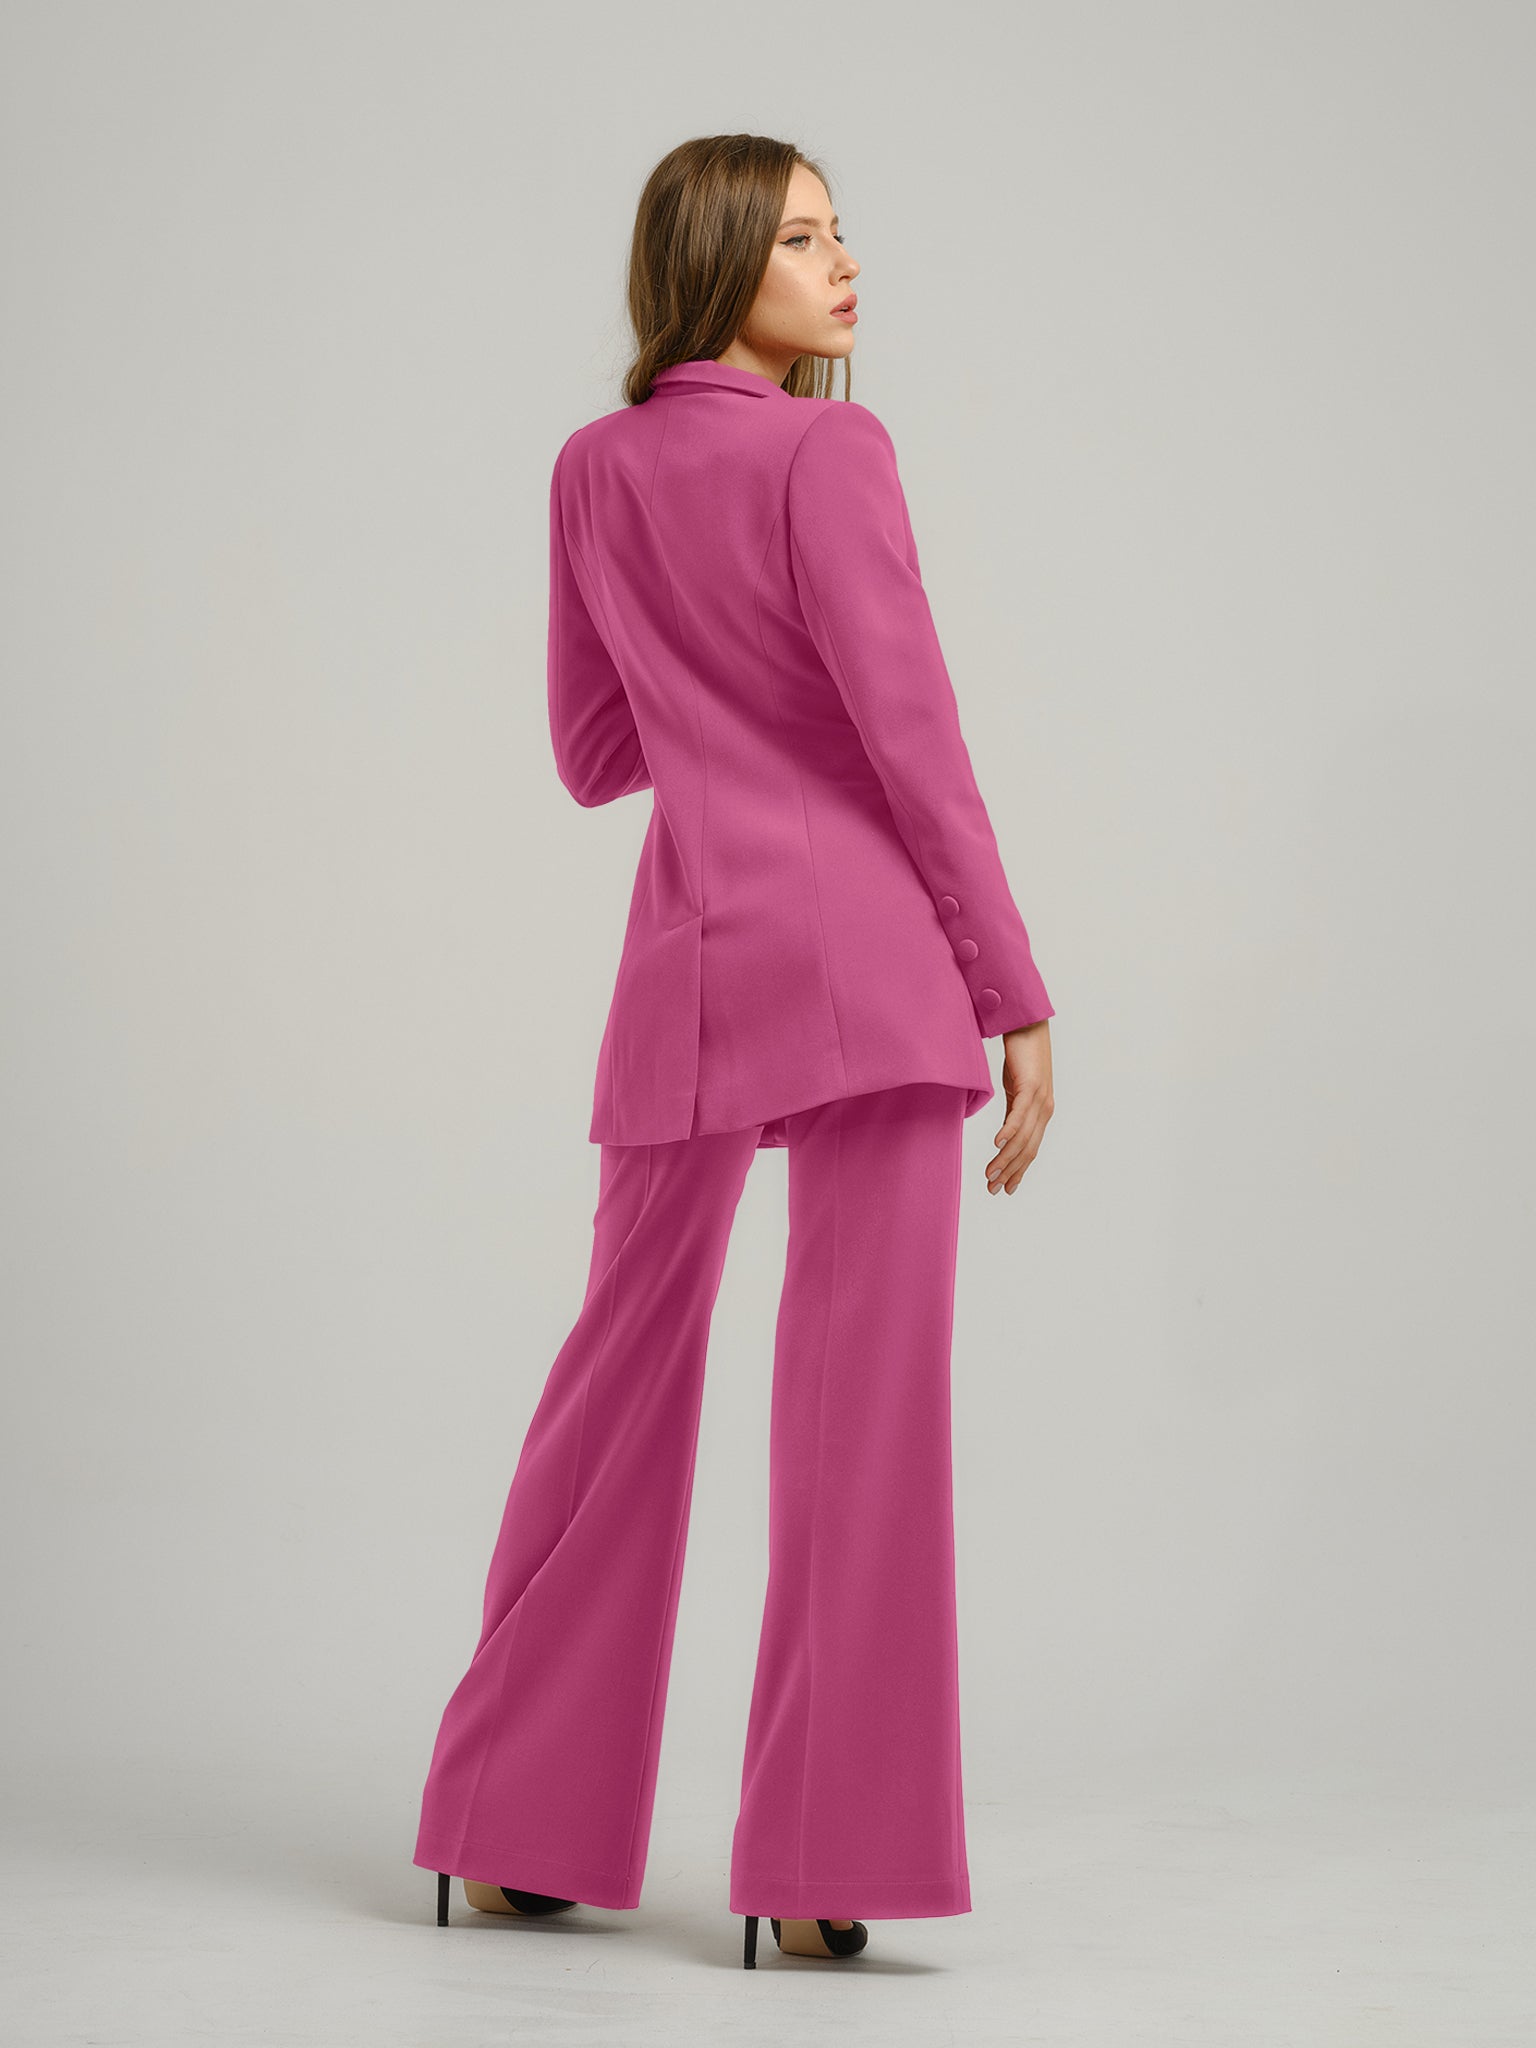 Tia Dorraine Sweet Desire High-Waist Flared Trousers These classic flared trousers would fit perfectly in any woman’s capsule wardrobe. With their full length, they can be worn with heeled boots or high heels in the office. The trousers feature a classic